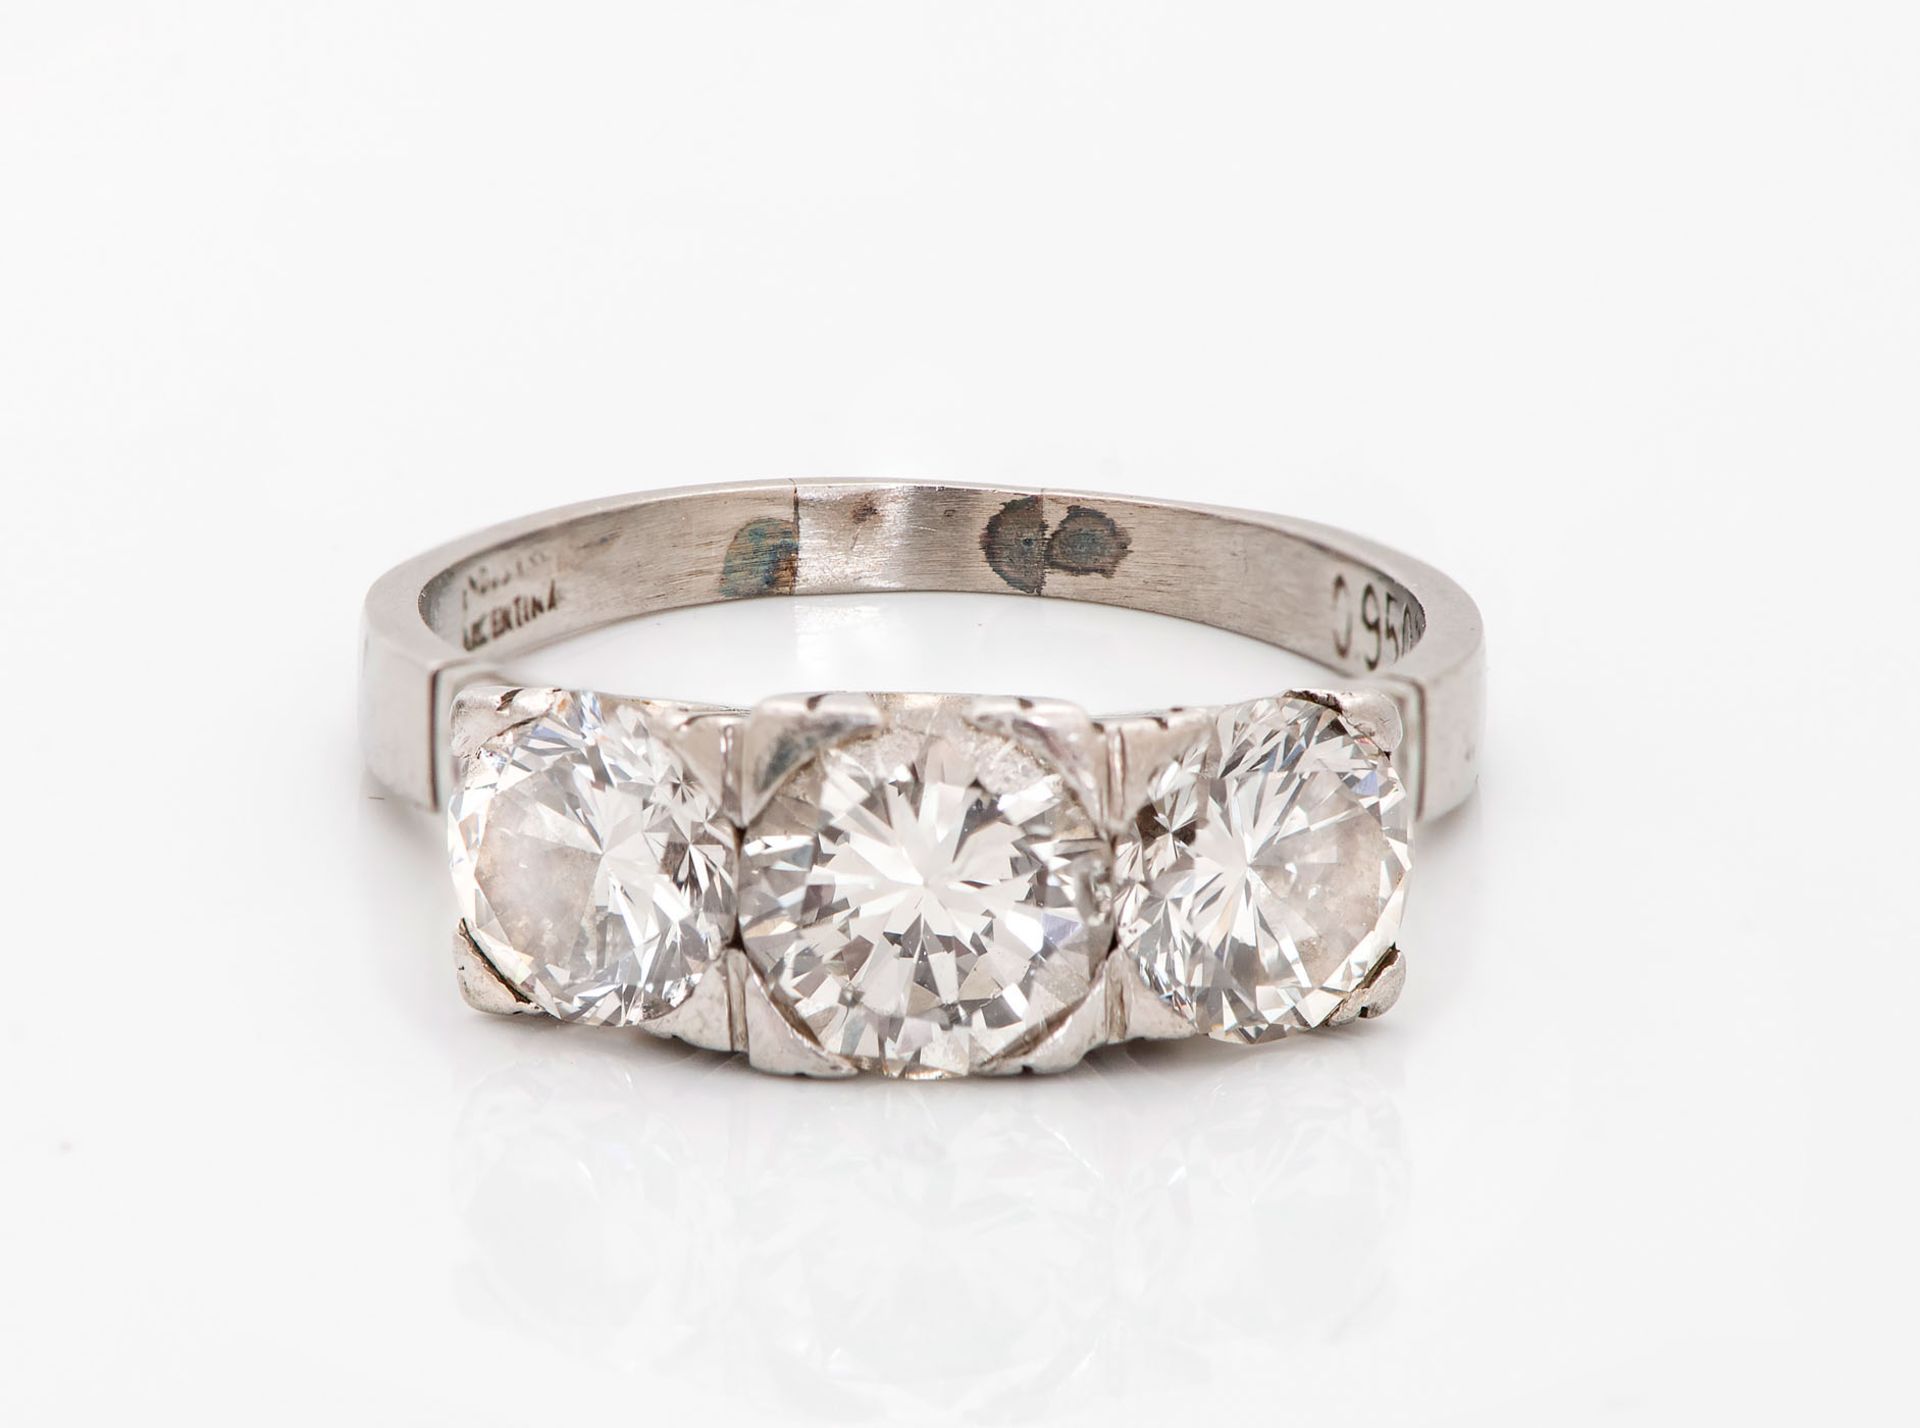 A Platinum and Diamond Ring - Image 2 of 3